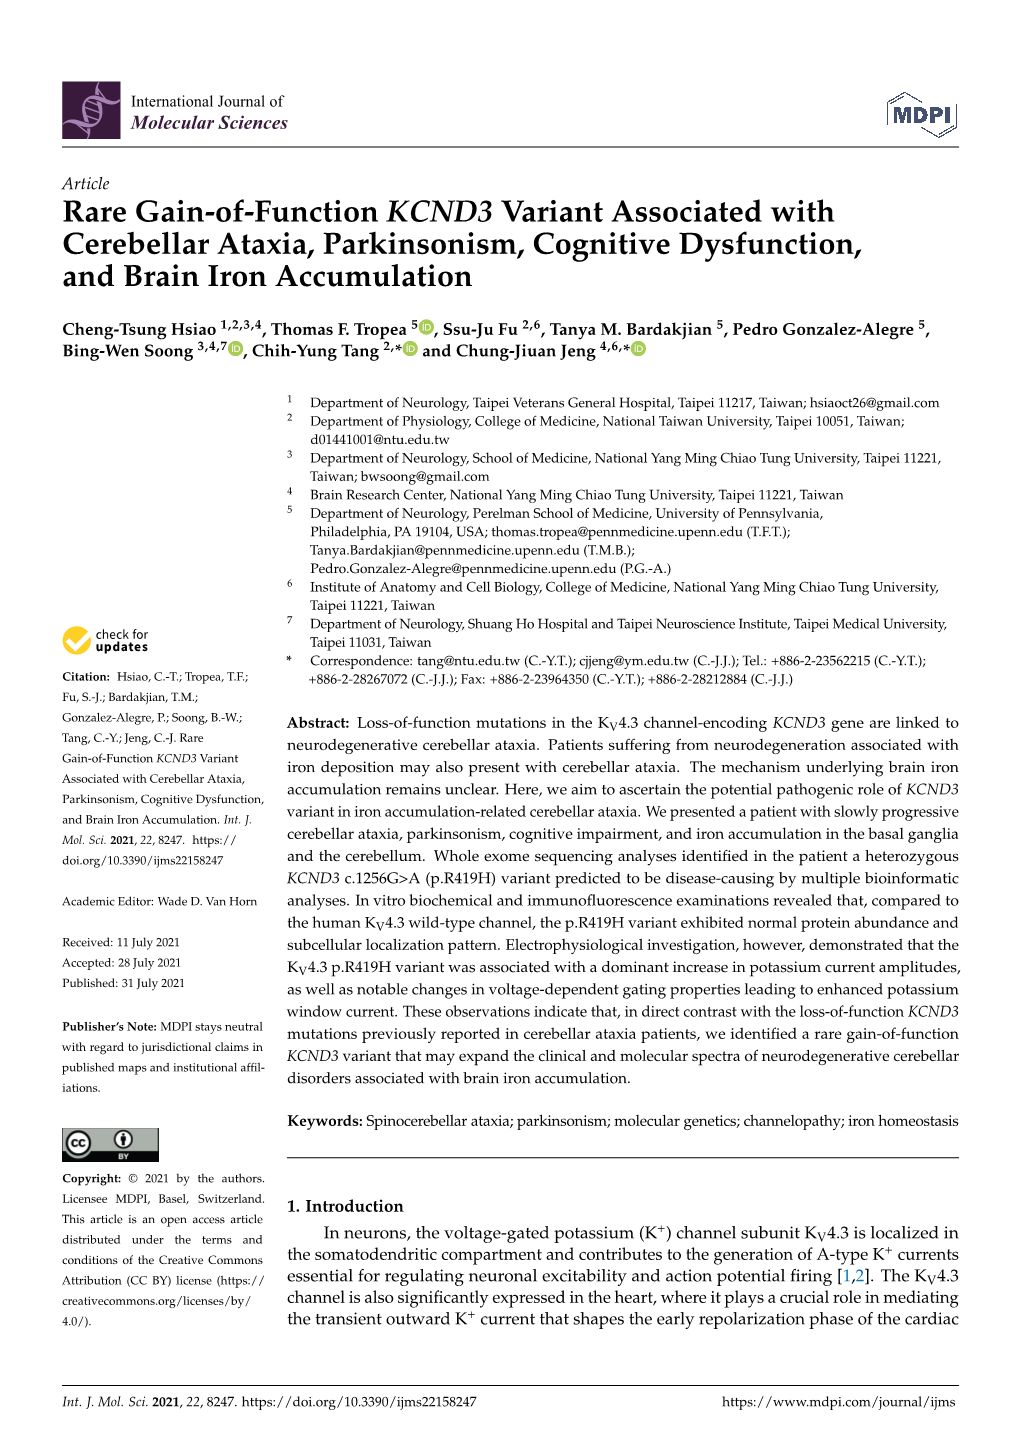 Rare Gain-Of-Function KCND3 Variant Associated with Cerebellar Ataxia, Parkinsonism, Cognitive Dysfunction, and Brain Iron Accumulation